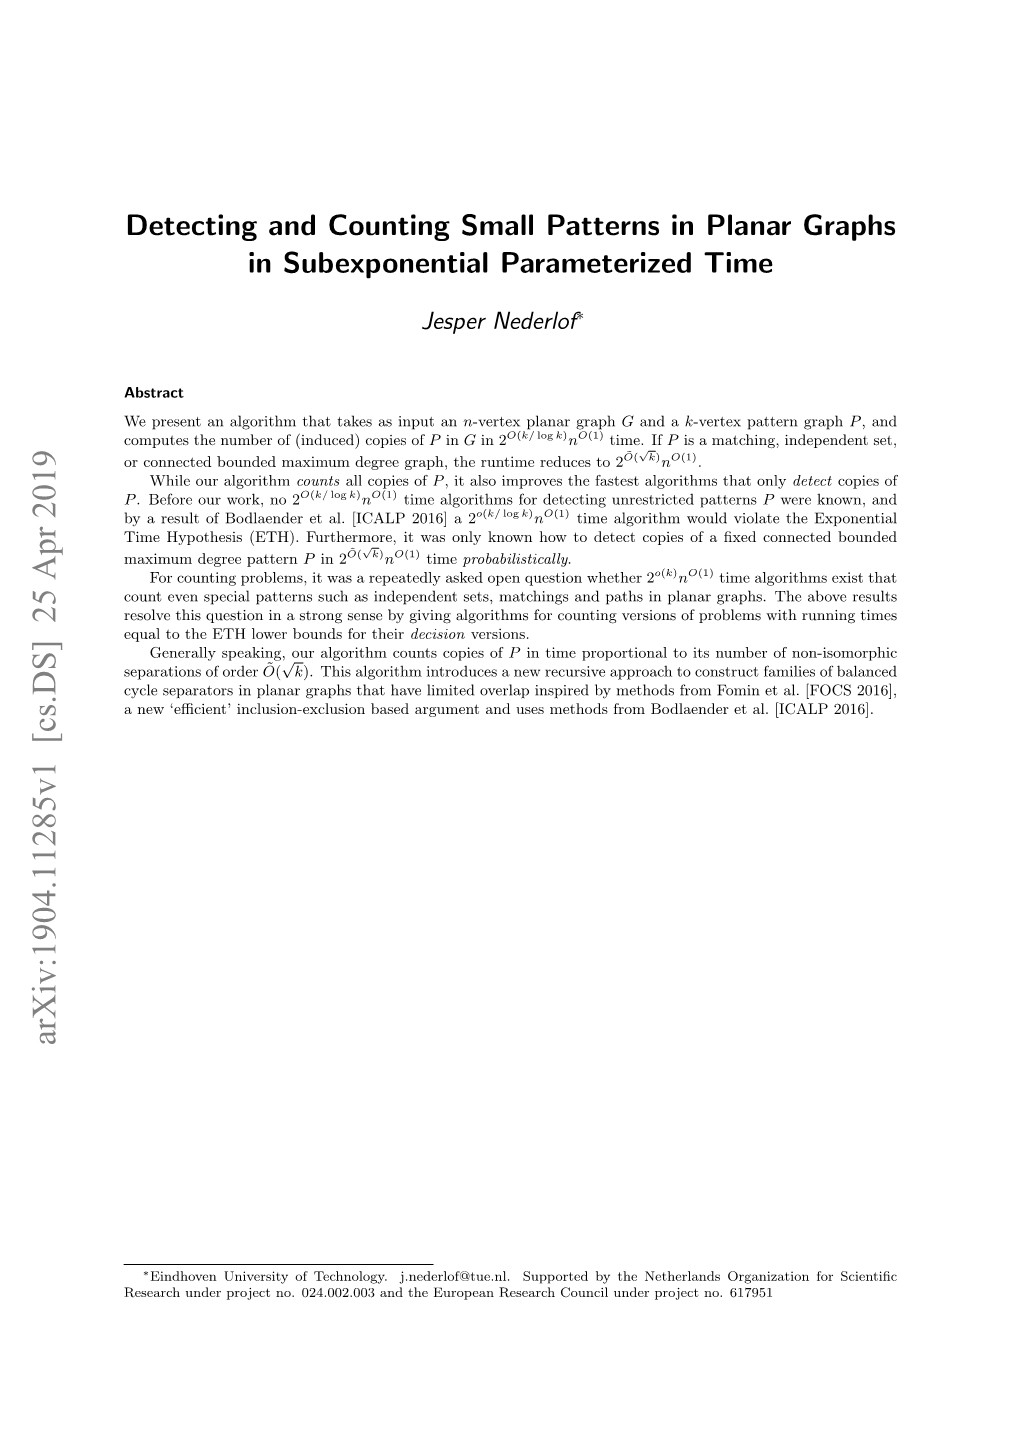 Detecting and Counting Small Patterns in Planar Graphs in Subexponential Parameterized Time